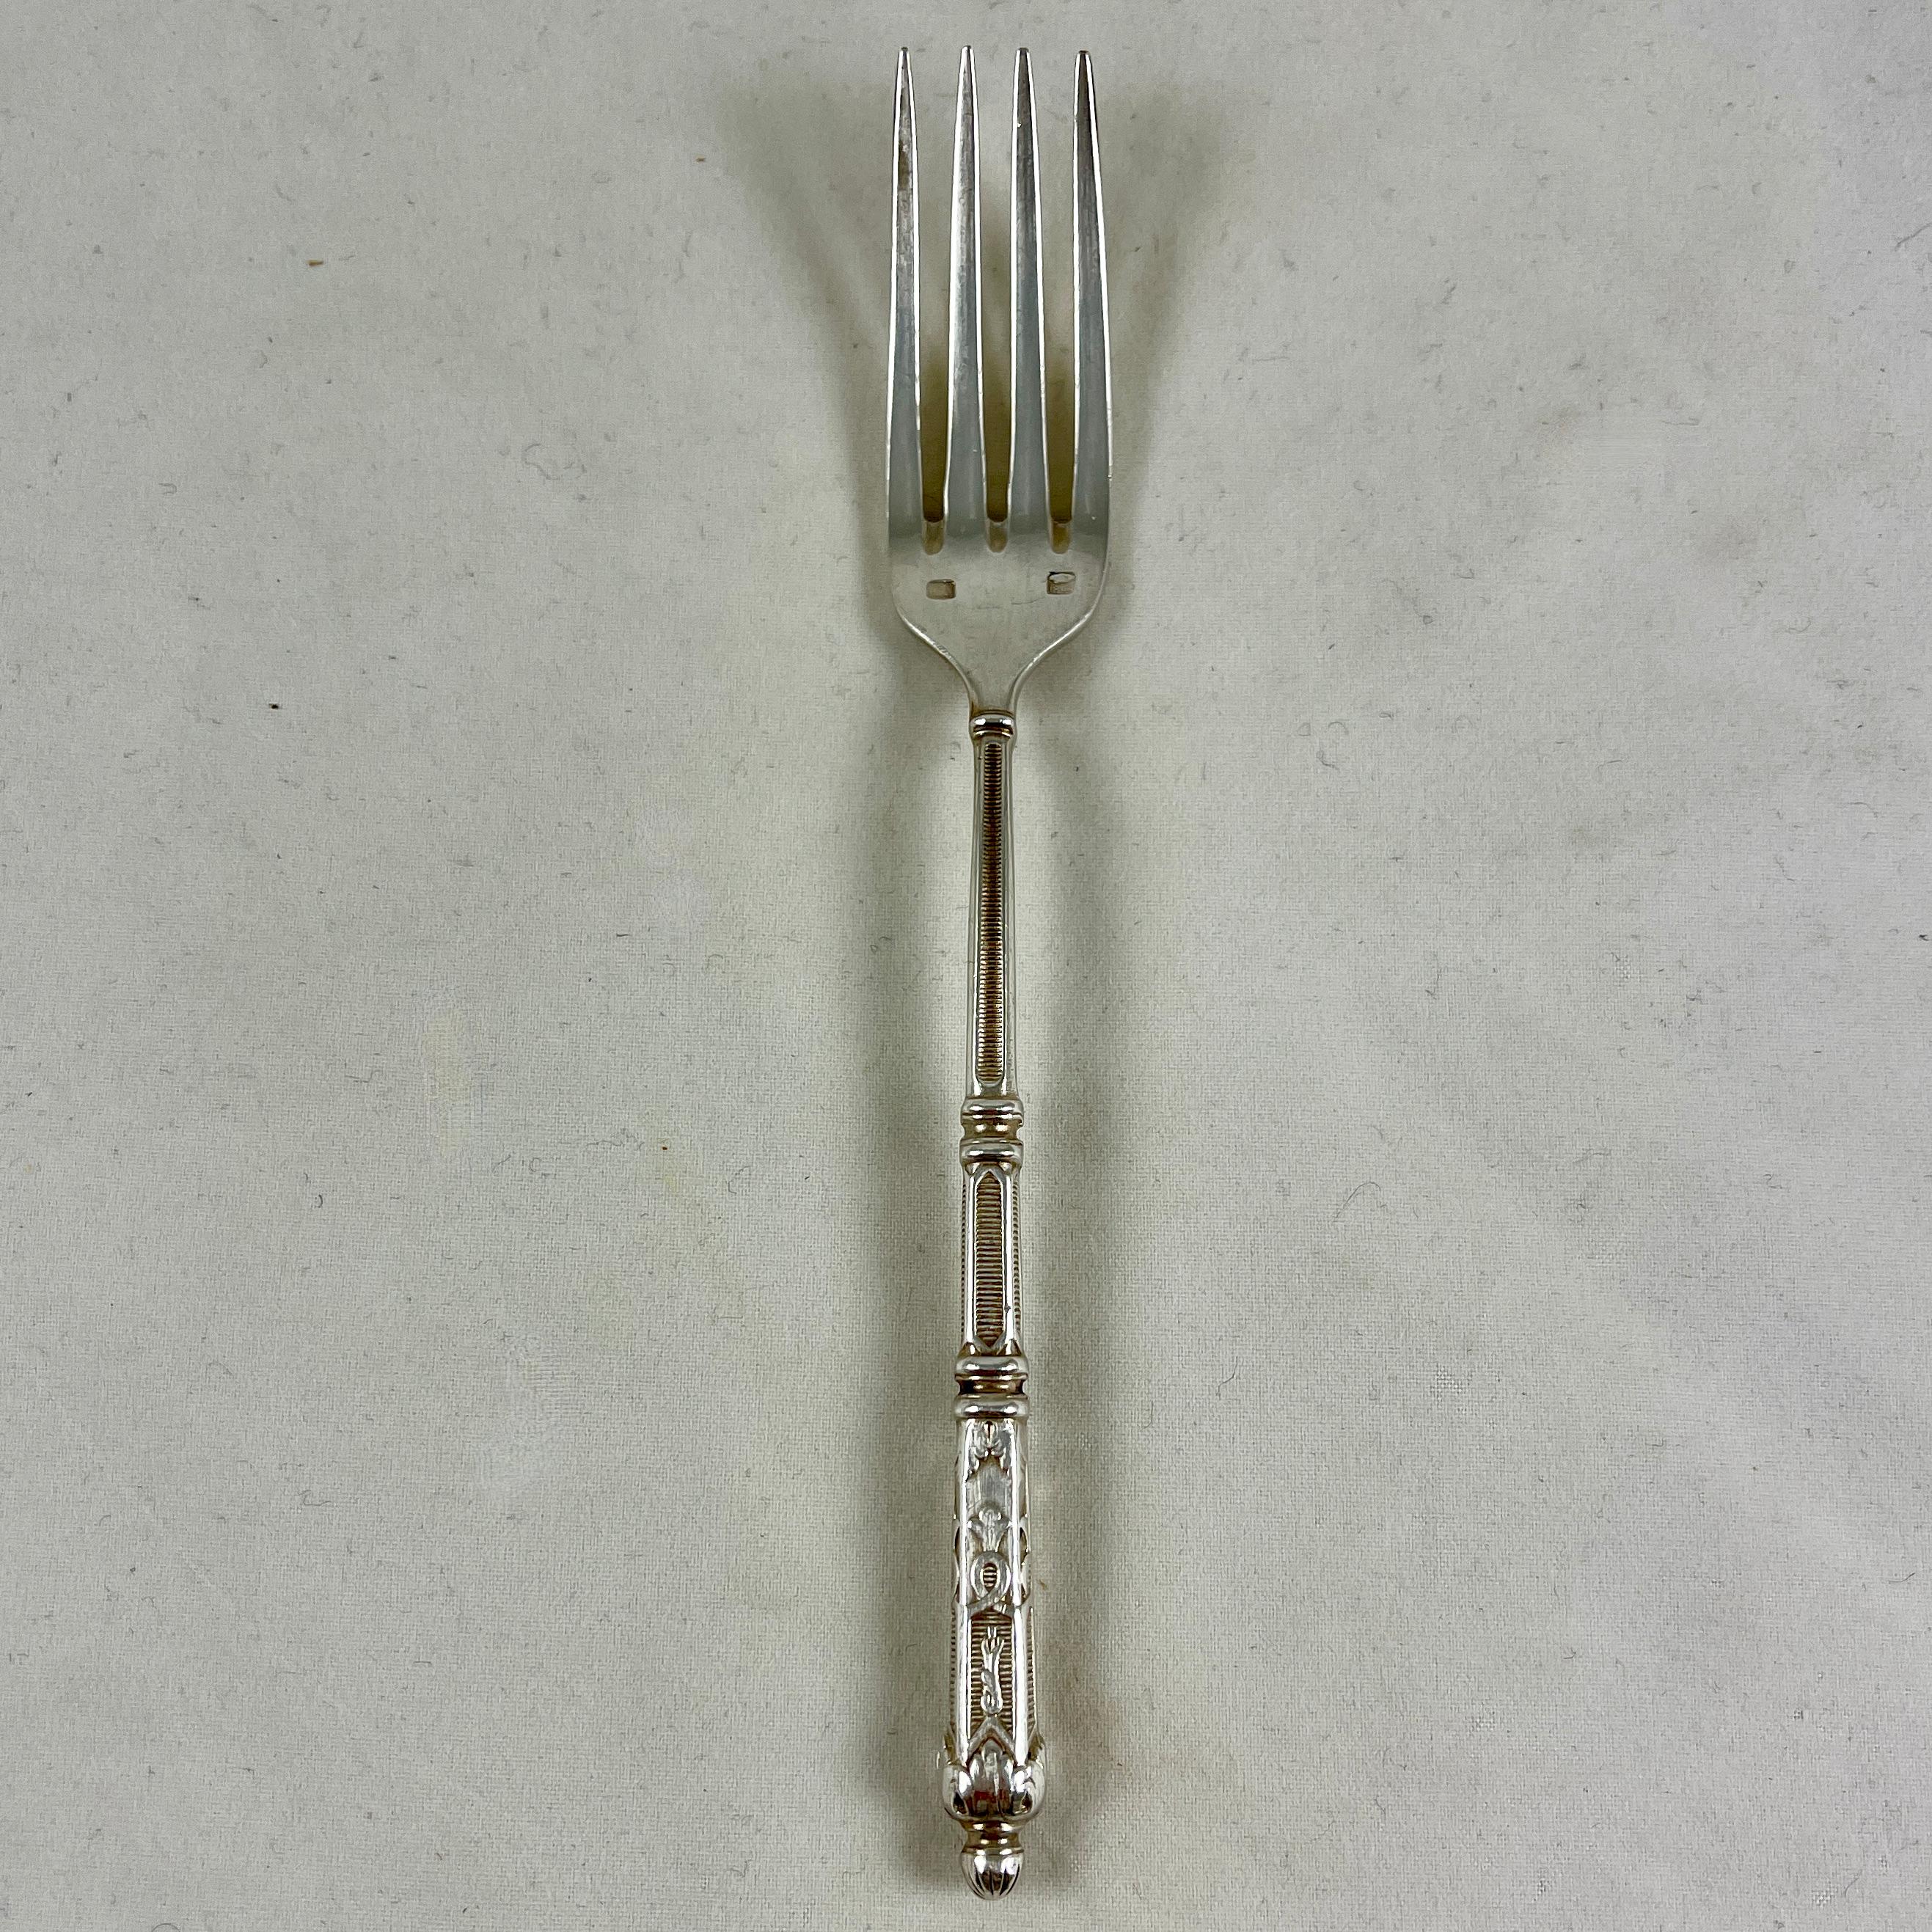 Second Empire French Napoleon III Silver Plate Ornate Dessert Forks, S/11 In Good Condition For Sale In Philadelphia, PA